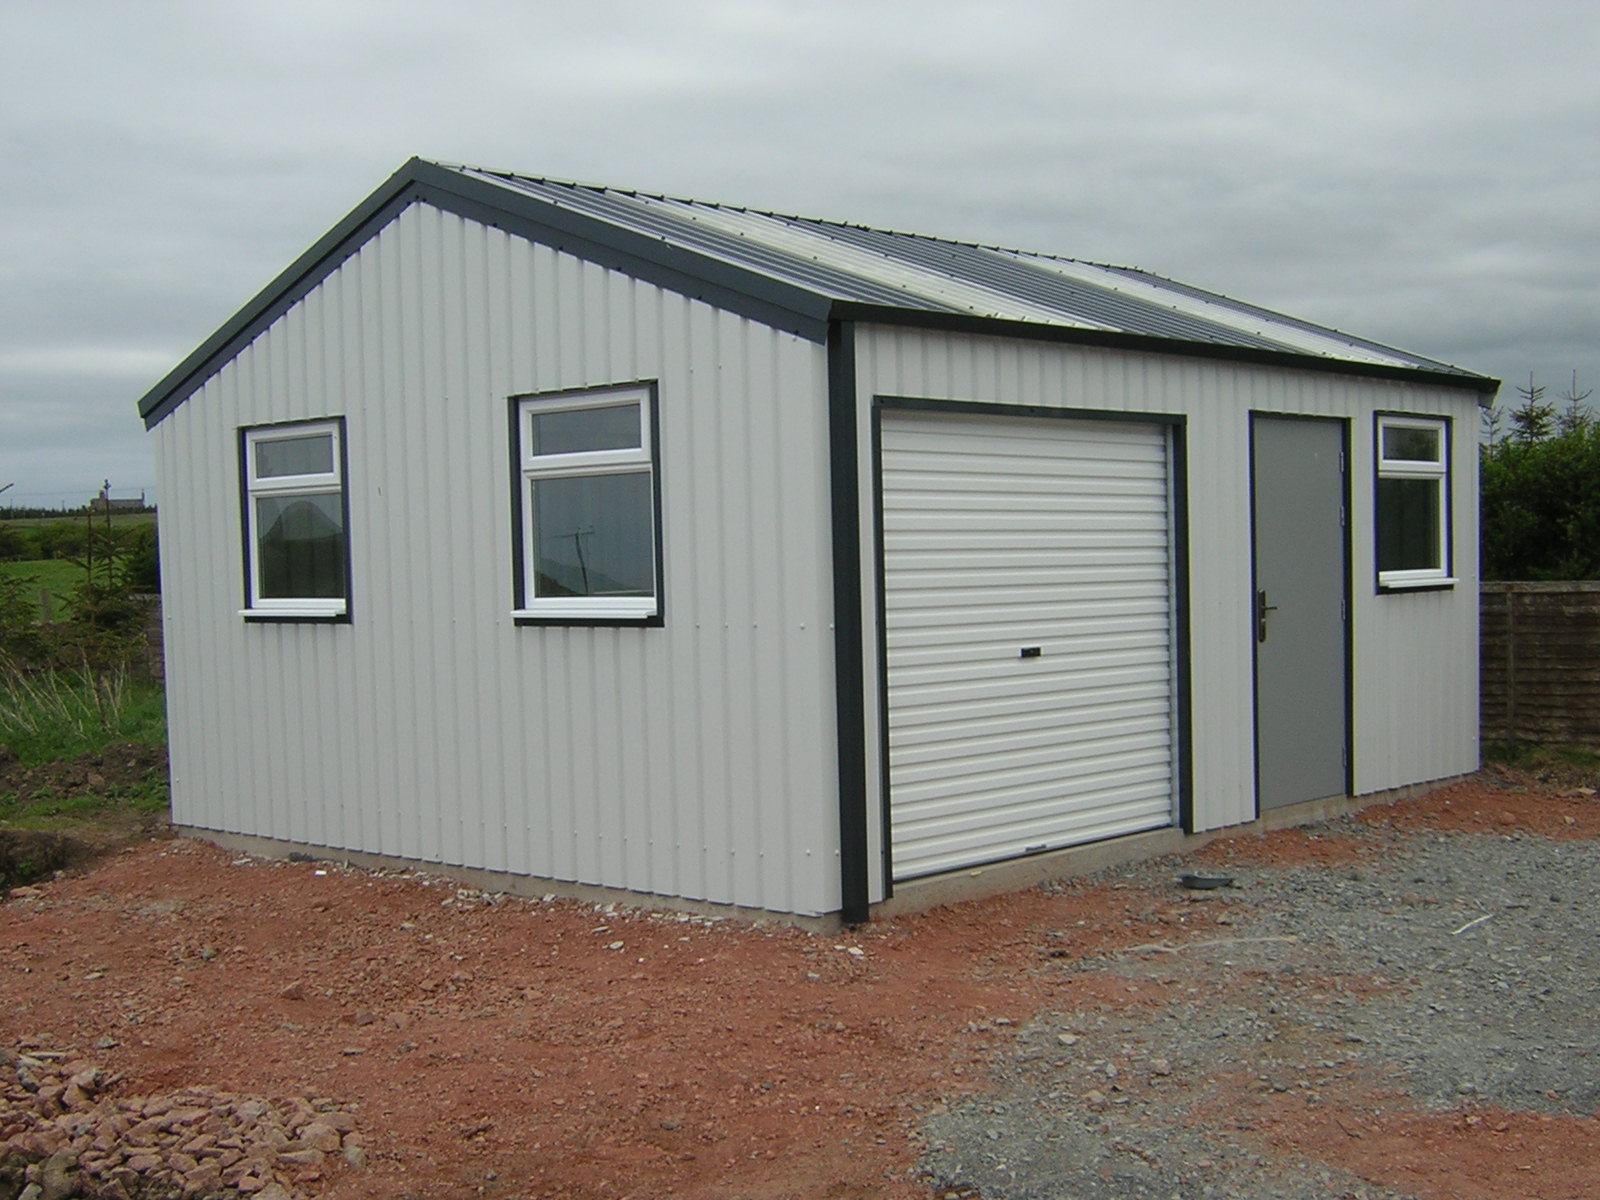 Bespoke Steel Buildings For Domestic Workshops In Cheshire